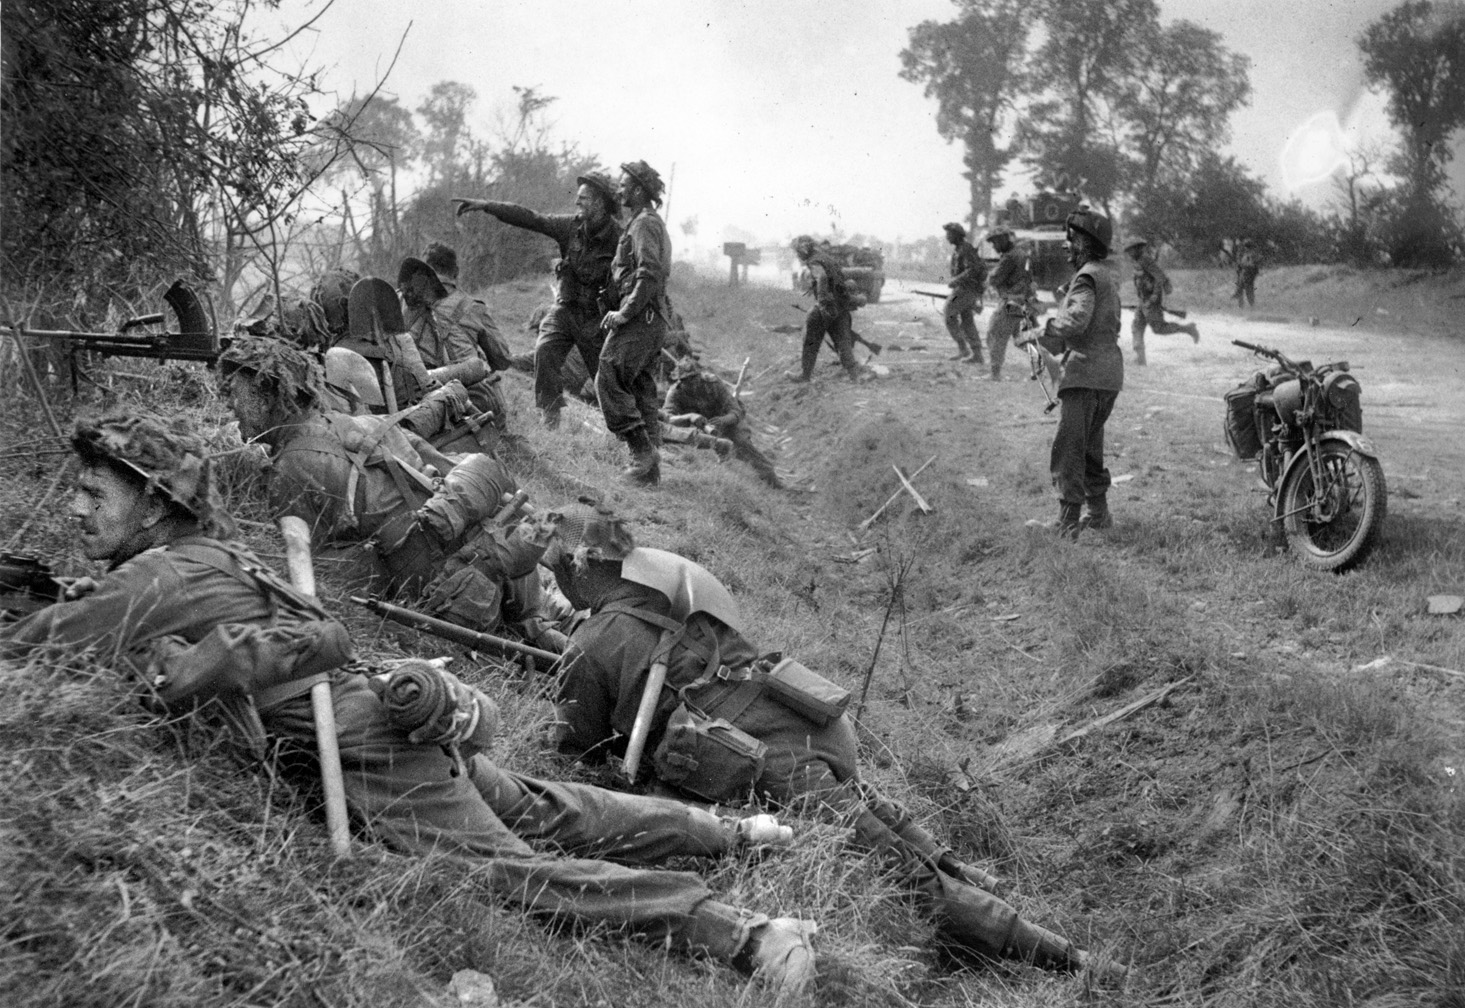 British infantry of the 1st Welsh Guards take cover behind a Norman hedgerow during Operation Goodwood. The bocage, a patchwork of field and woodlands, heavily favored the defending Germans.